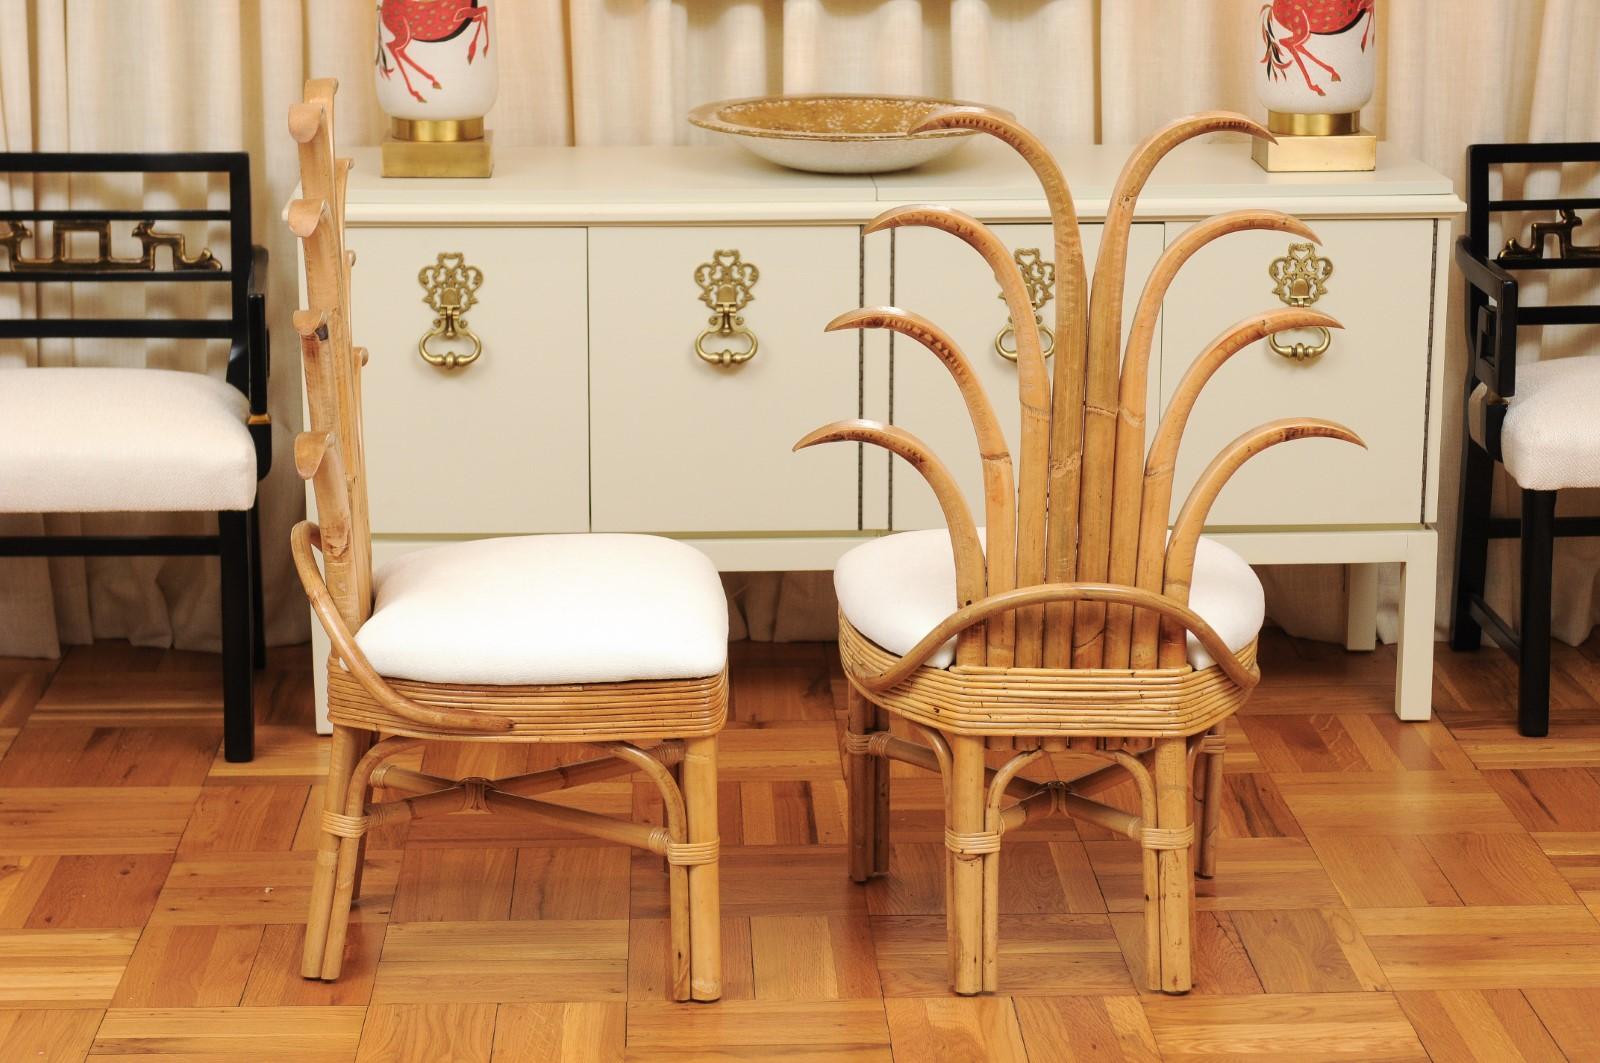 Exquisite Set of 10 Rattan and Cane Palm Frond Dining Chairs, circa 1950 For Sale 3